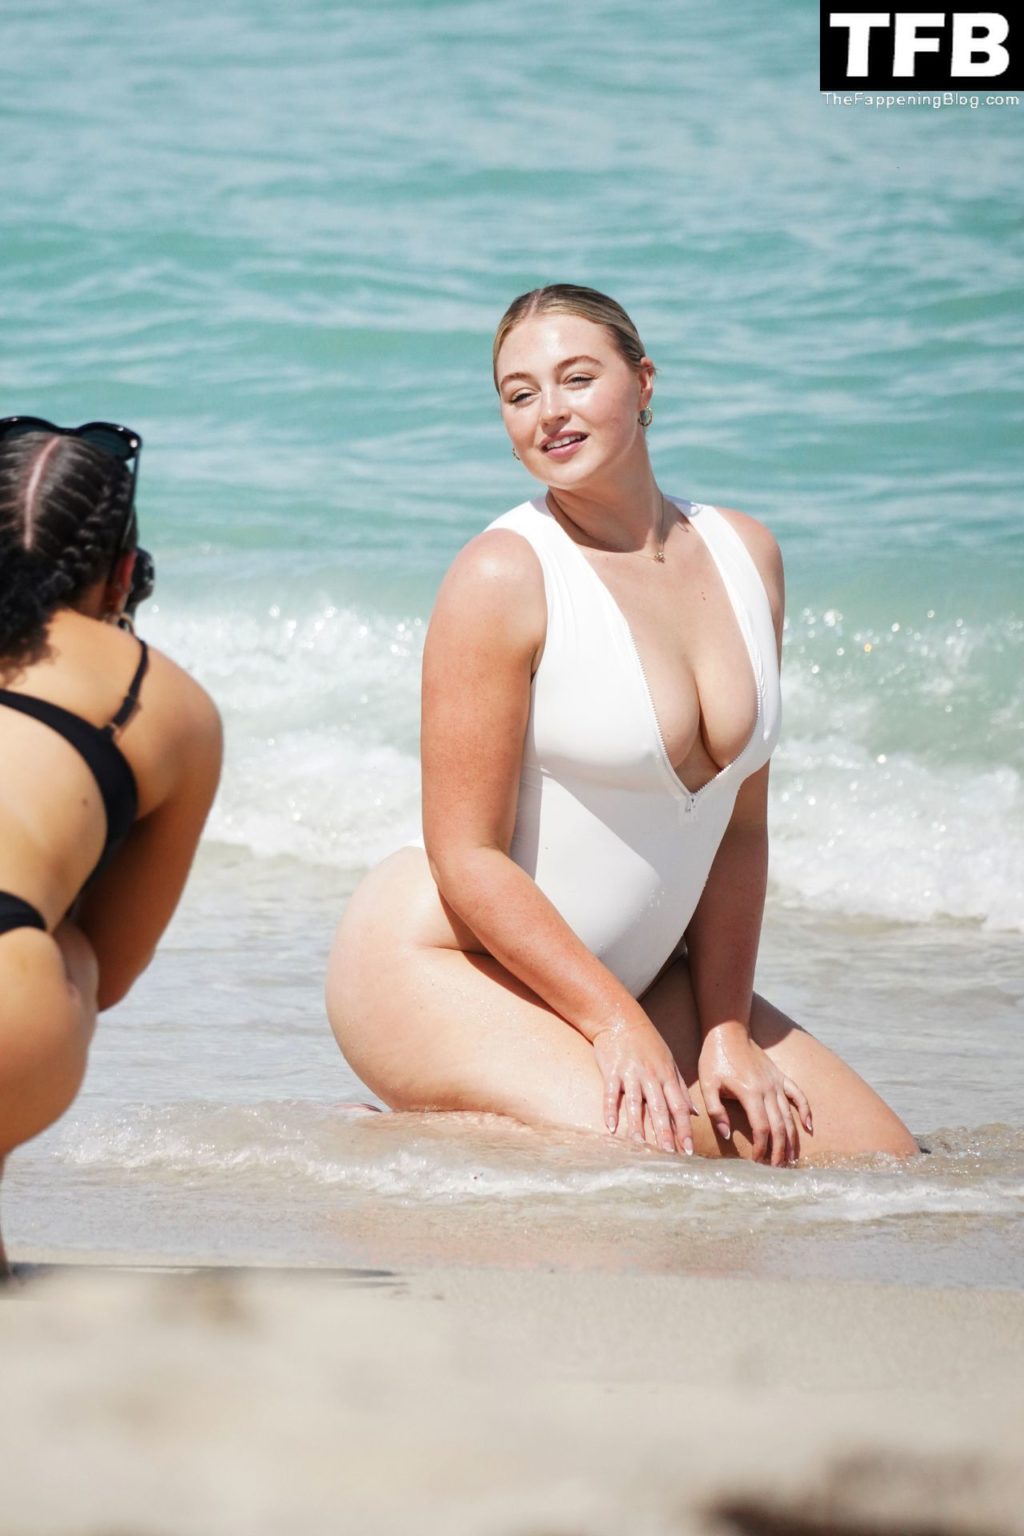 Iskra Lawrence Sexy The Fappening Blog 15 1024x1536 - Iskra Lawrence Displays Her Curves on the Beach in Miami (21 Photos)